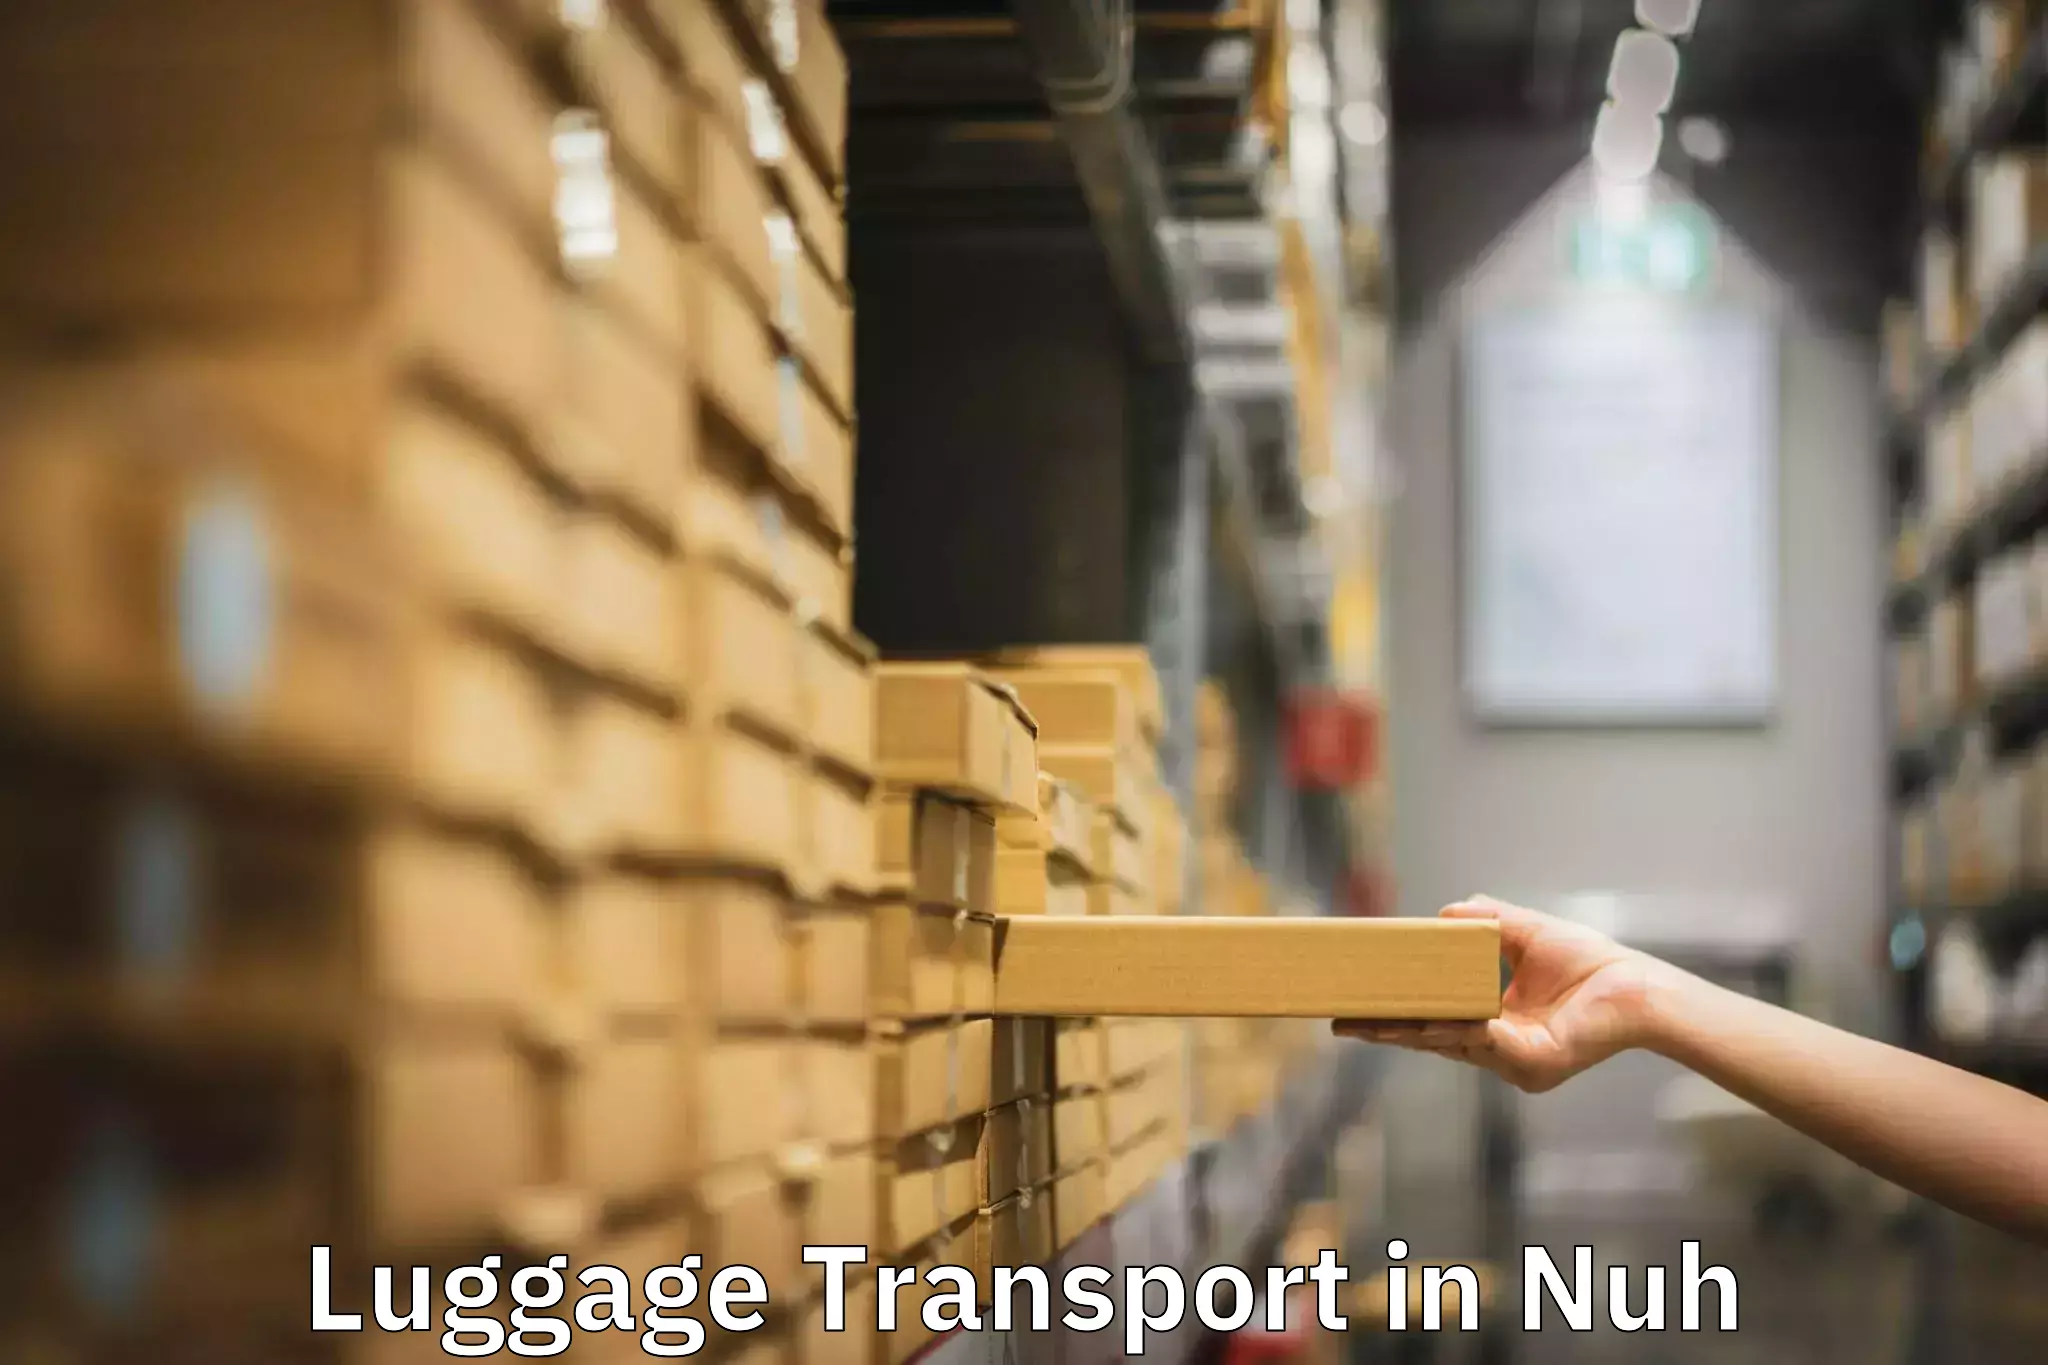 Luggage shipment specialists in Nuh